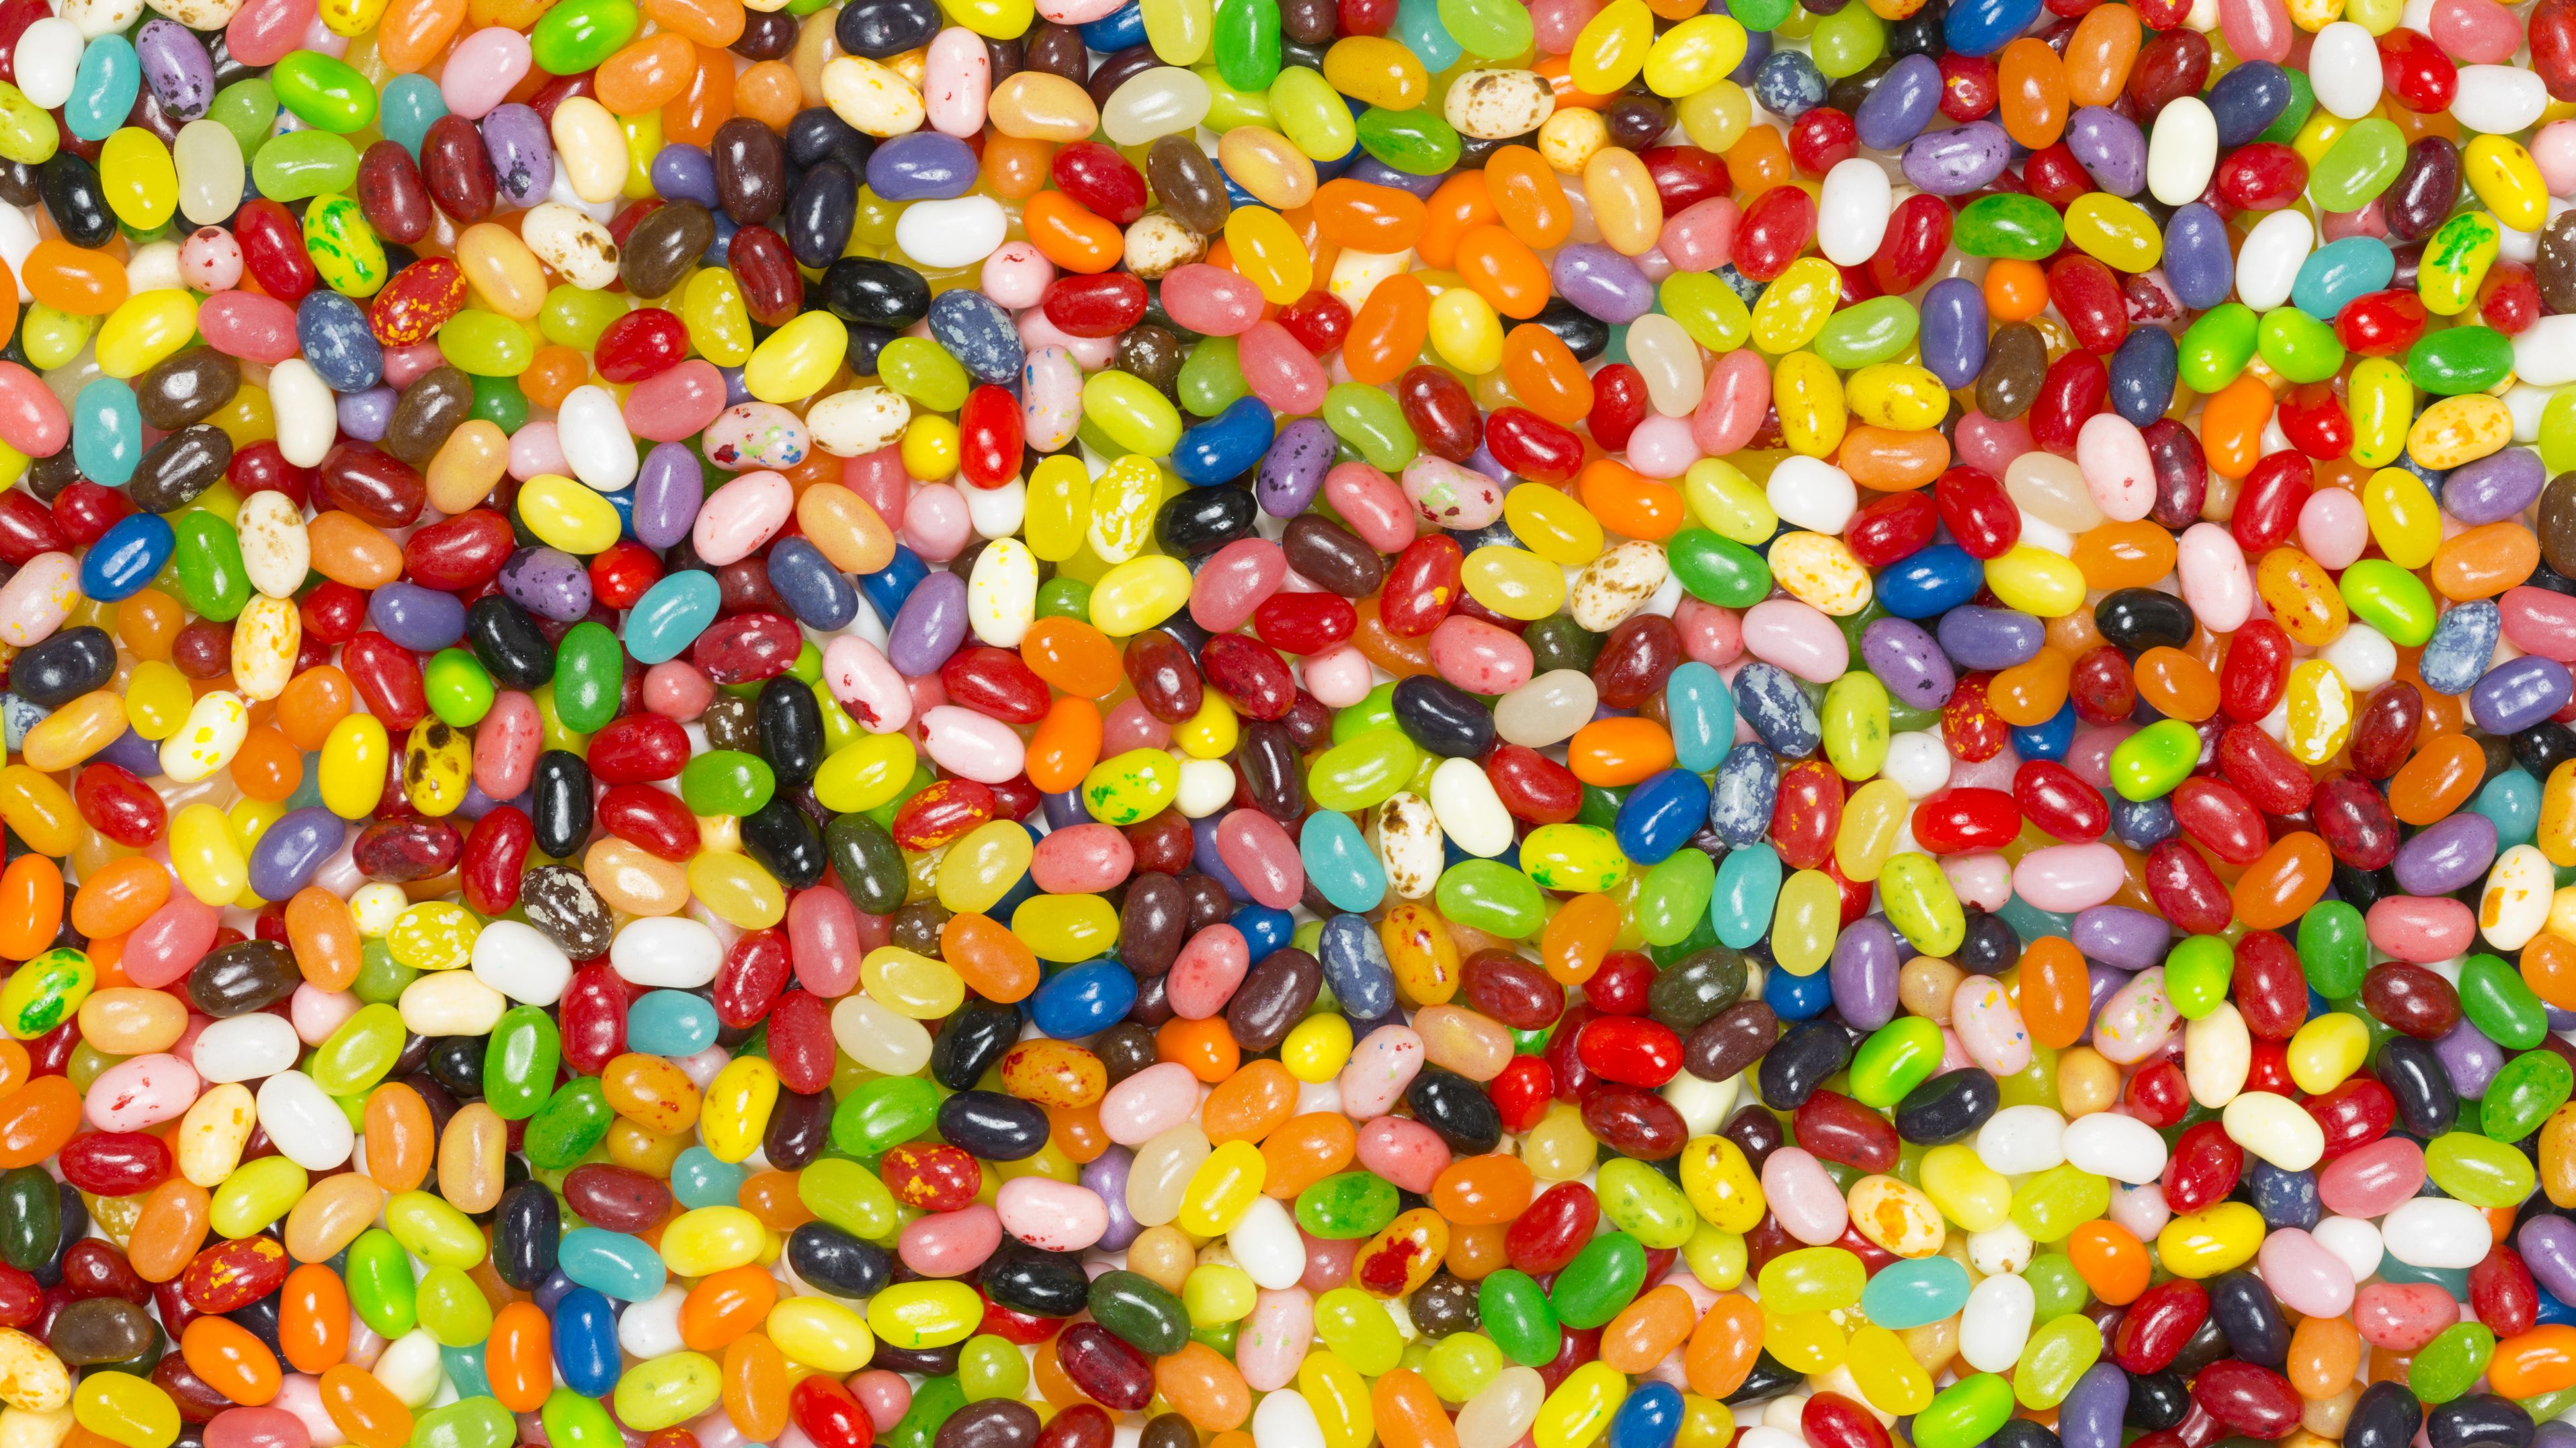 How Does Jelly Belly Create Its Weird Flavors? | Mental Floss